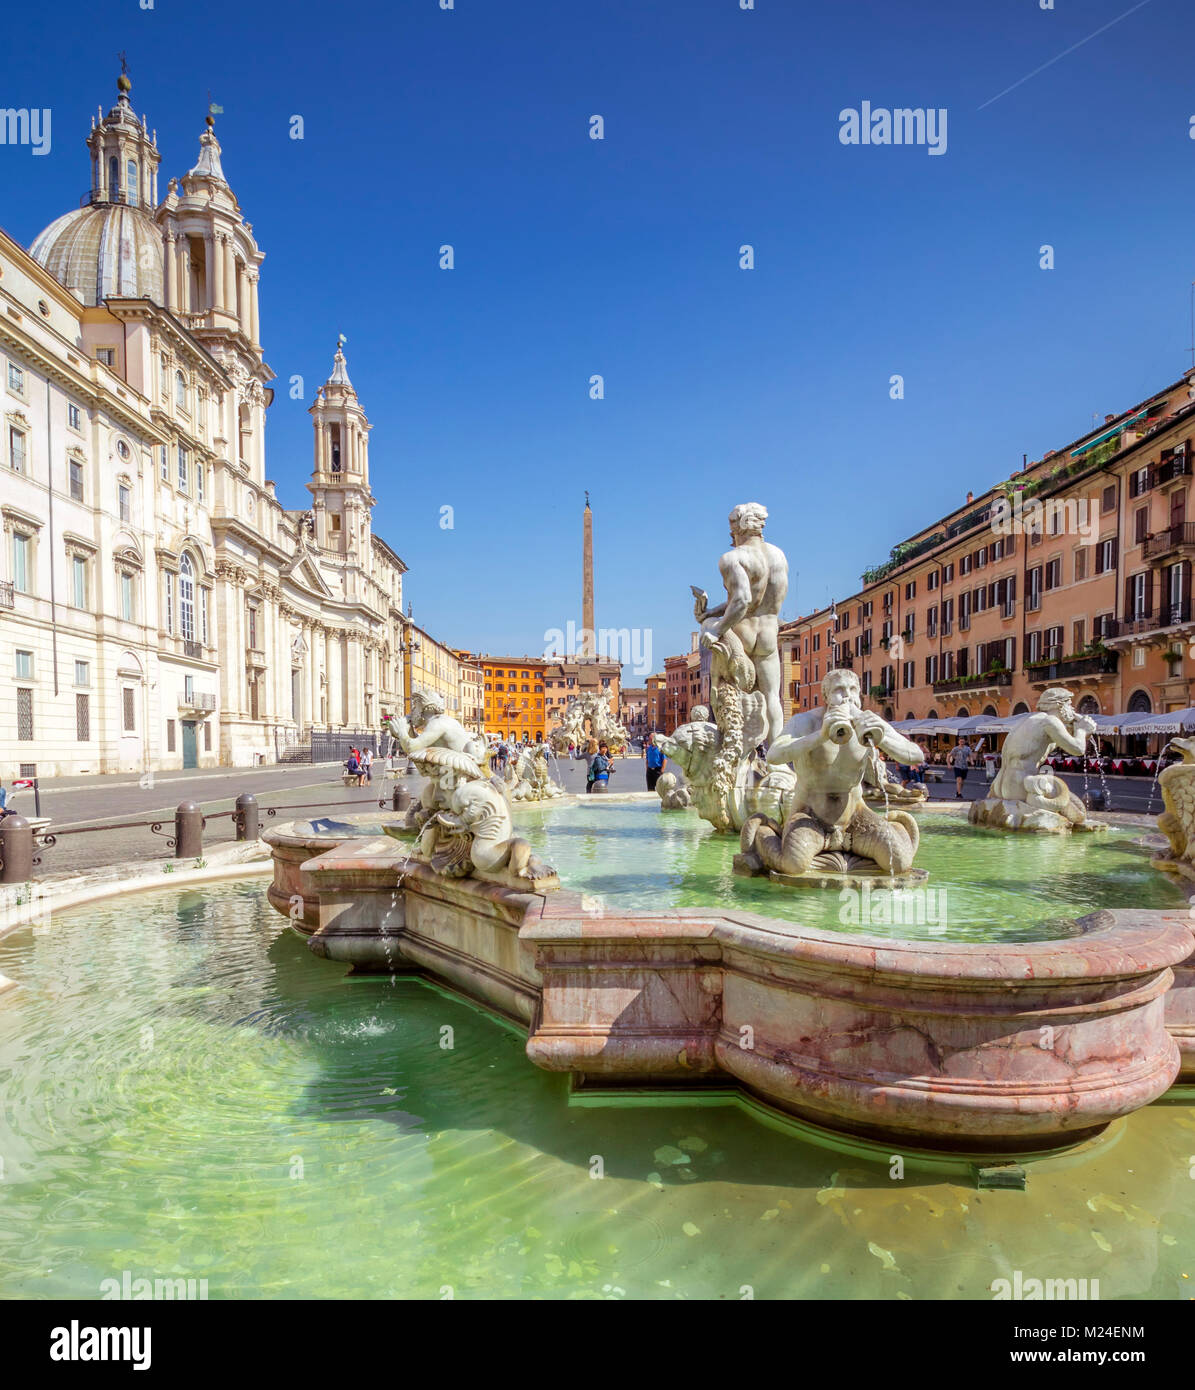 Piazza Navona and Moor fountain in the morning, Rome,Italy. Rome Piazza Navona is one of the main attractions of Rome and Italy Stock Photo